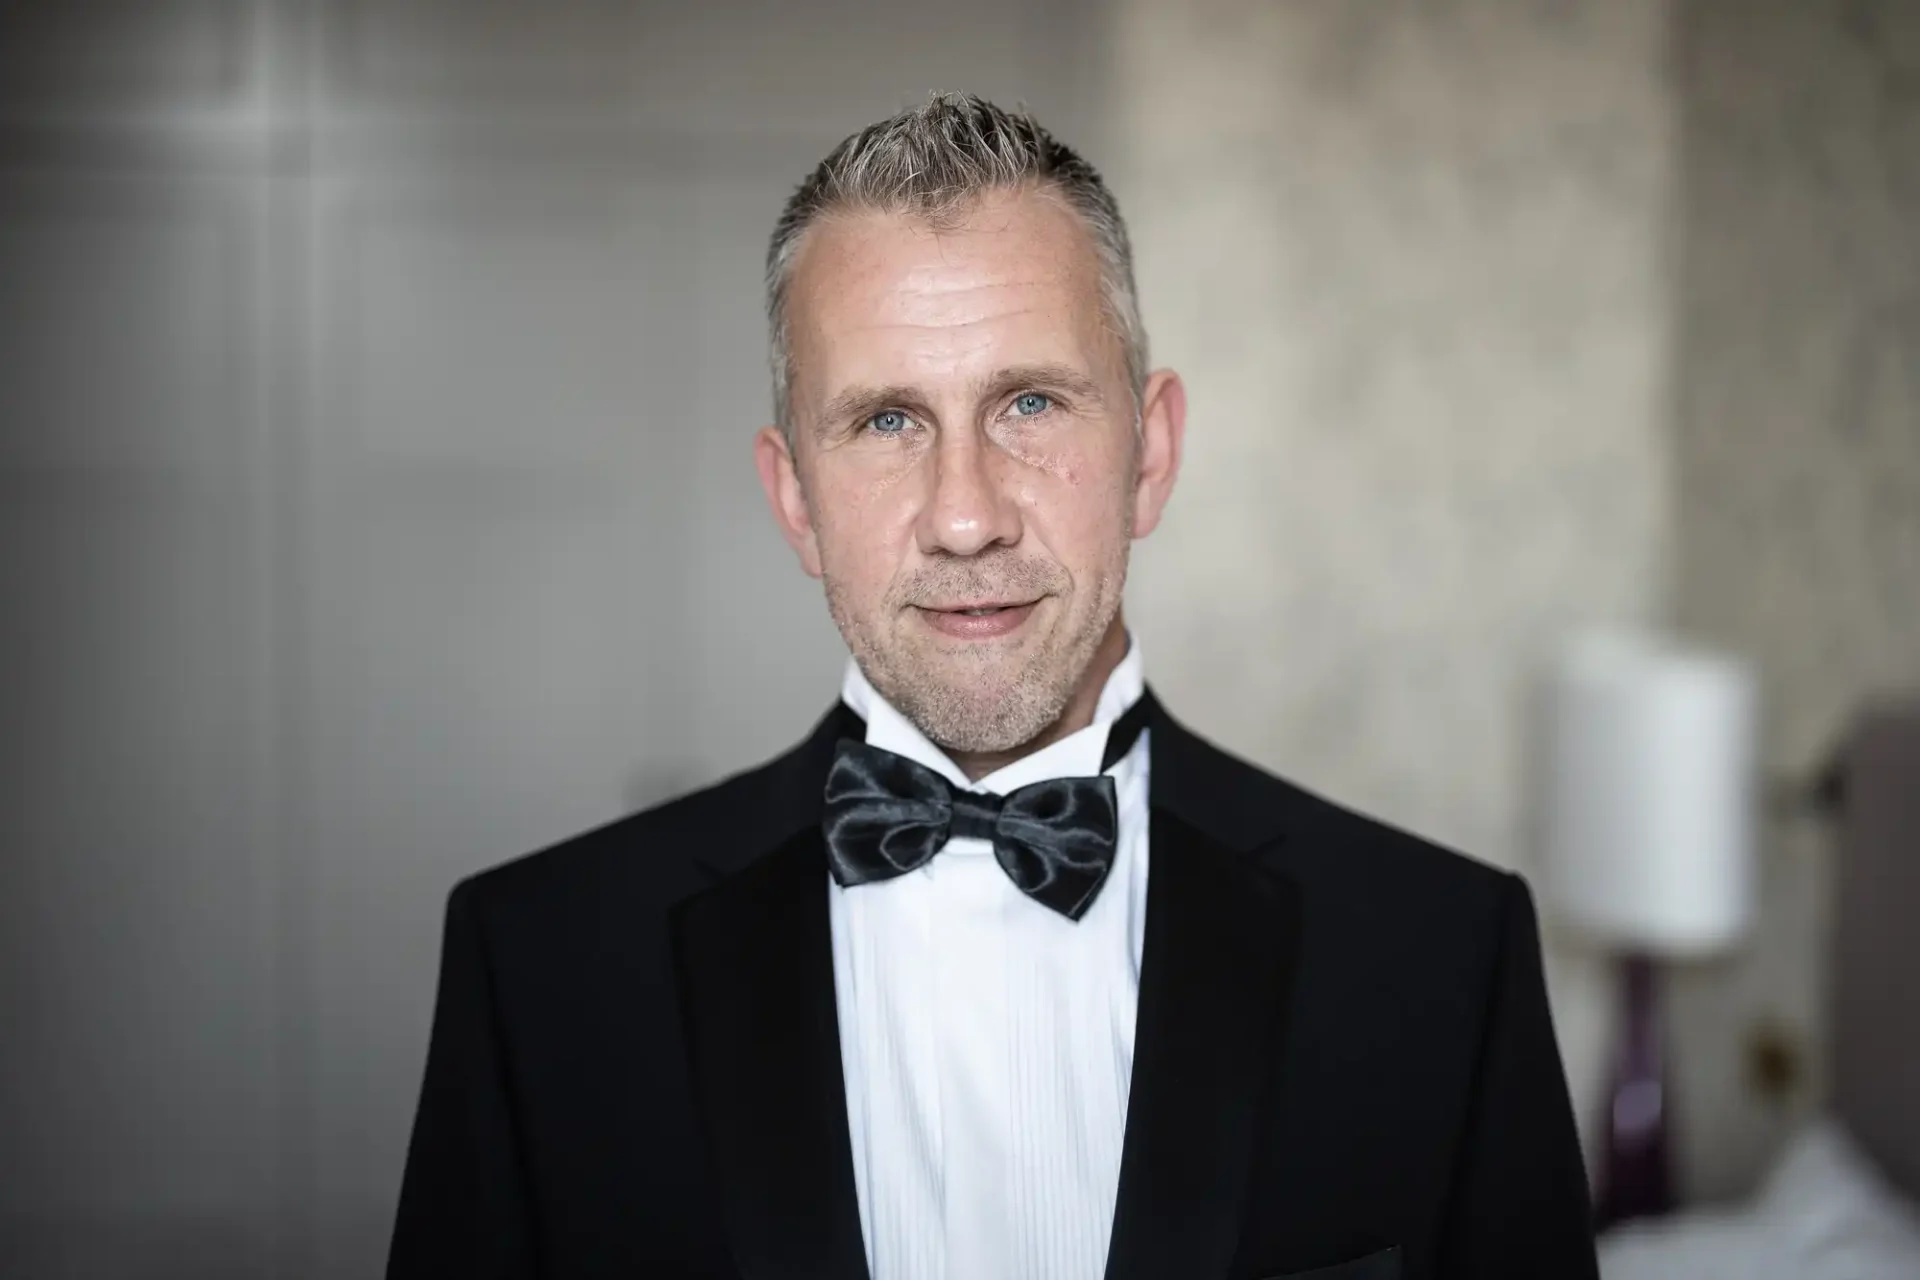 A middle-aged man with gray hair, wearing a black tuxedo and bow tie, standing in a well-lit room.